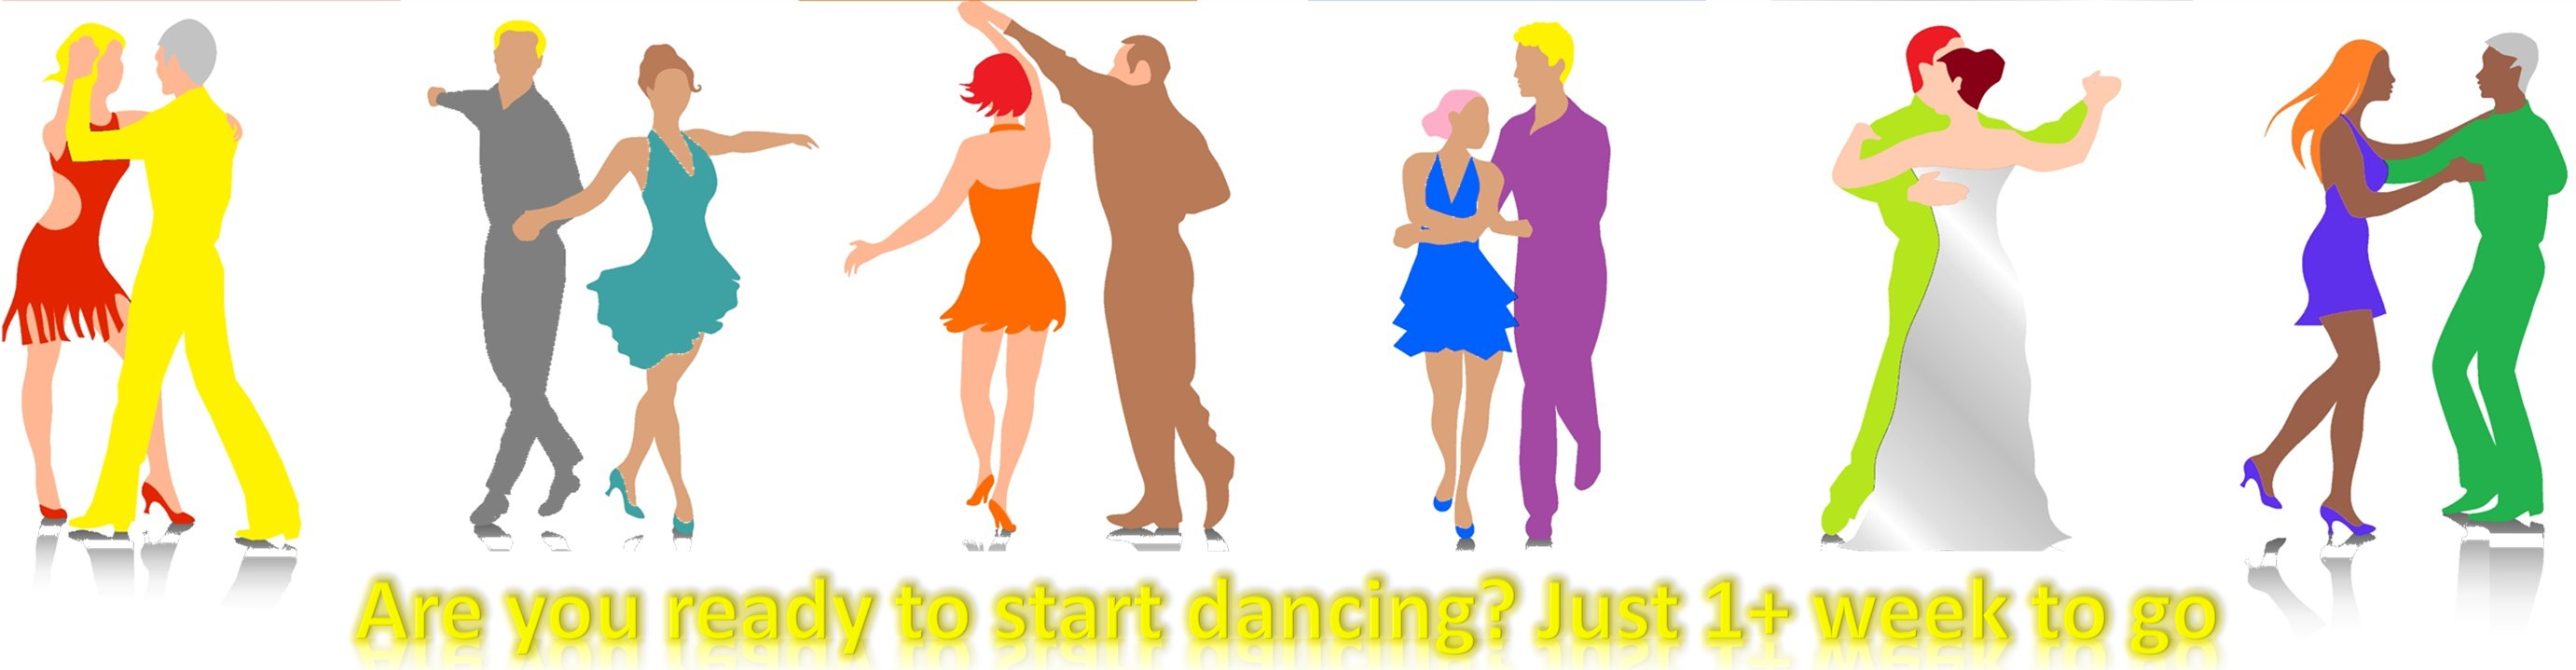 JUST 1+ week to the START DANCING TOGETHER !!!